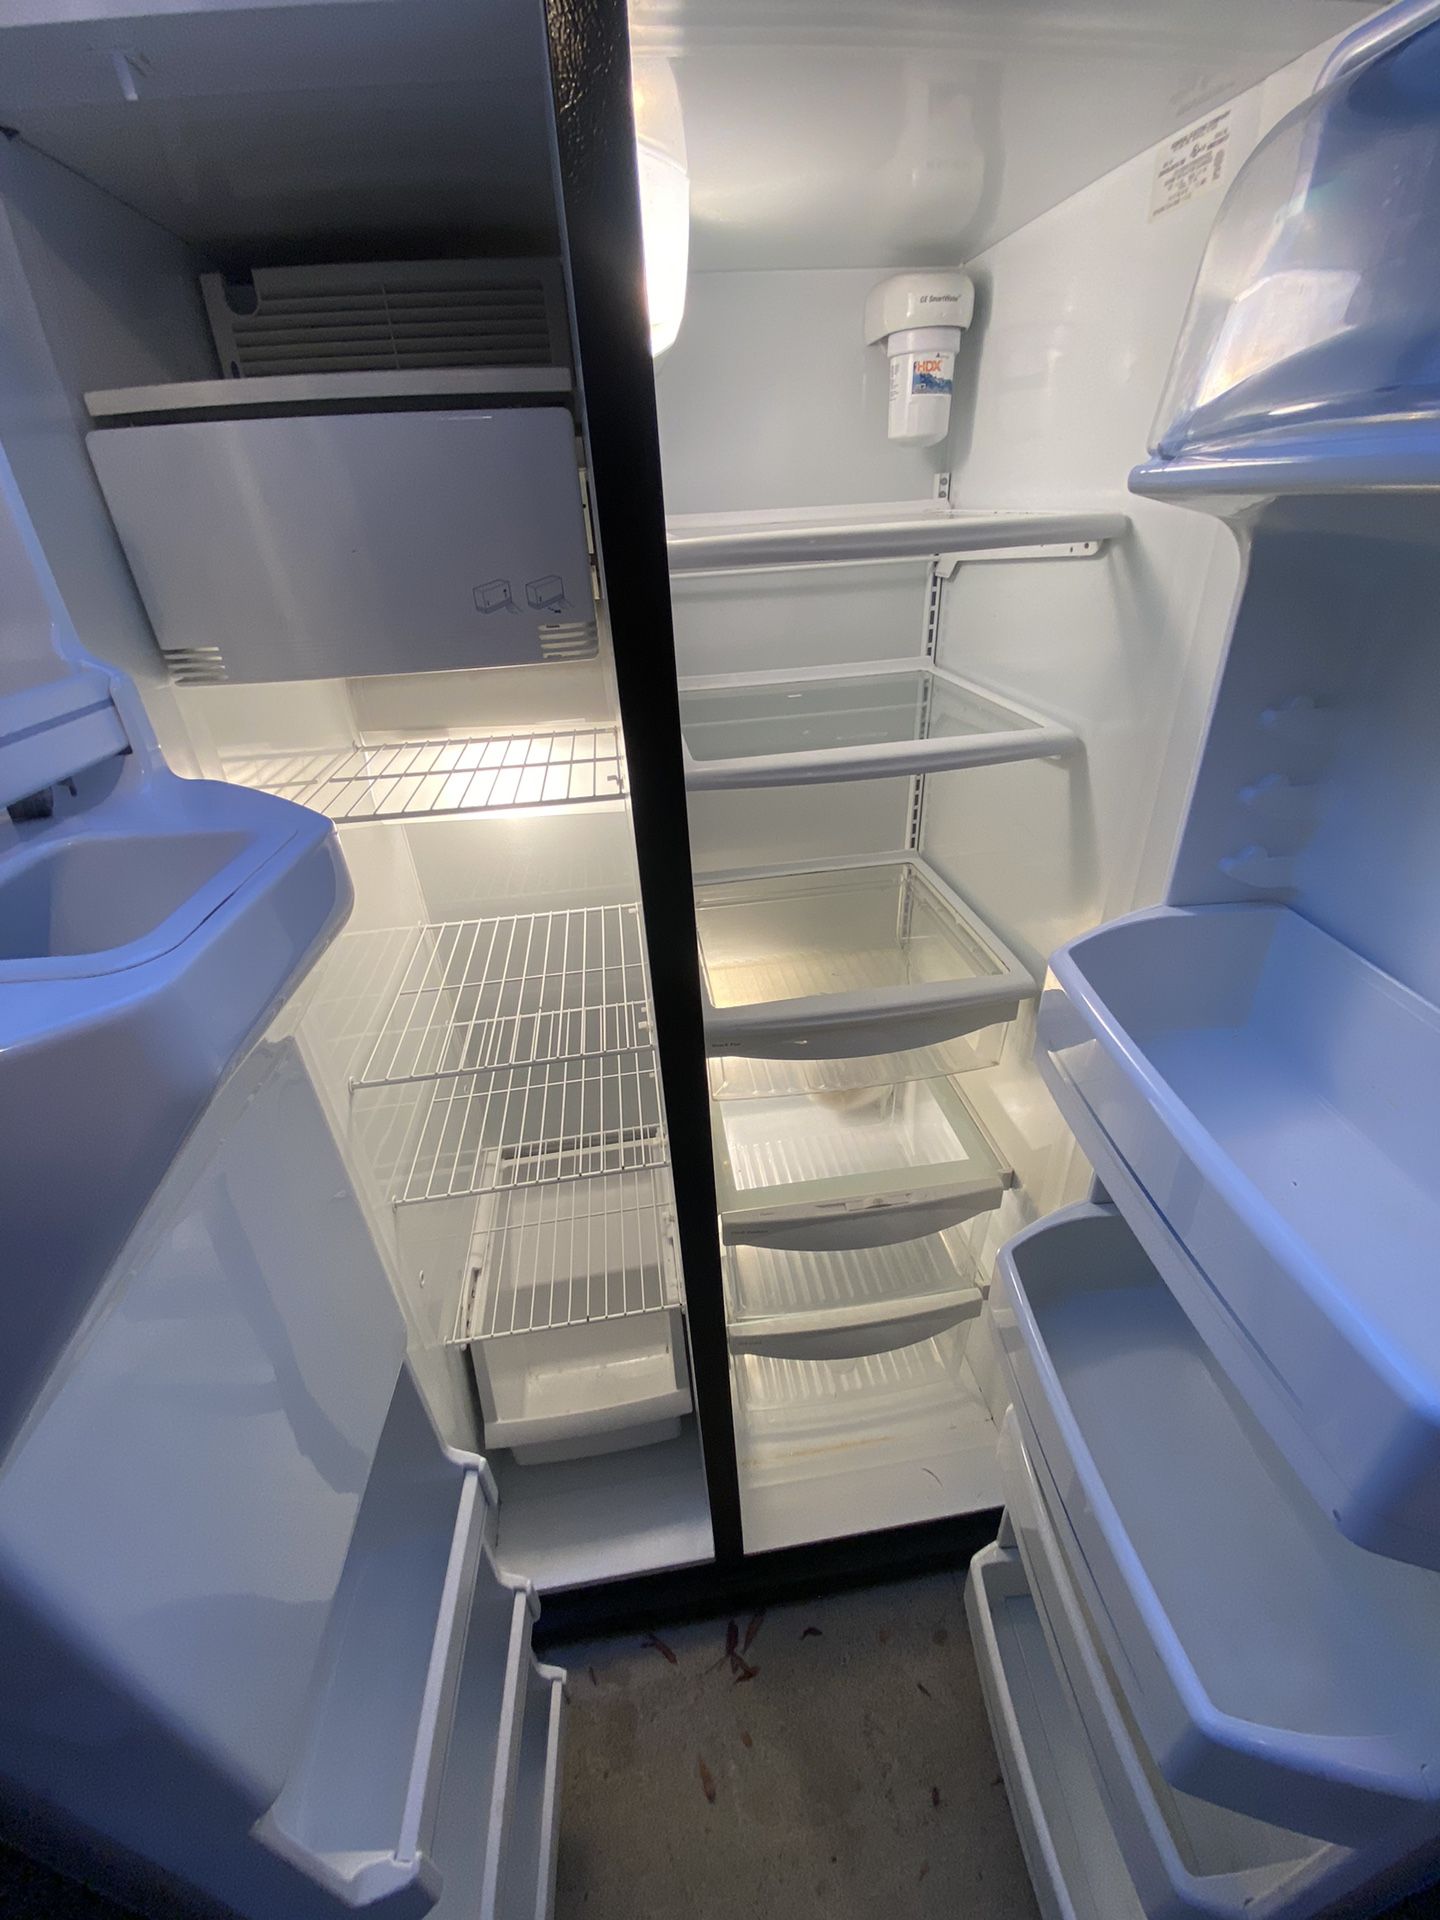 Stainless Steel Refrigerator With Freezer